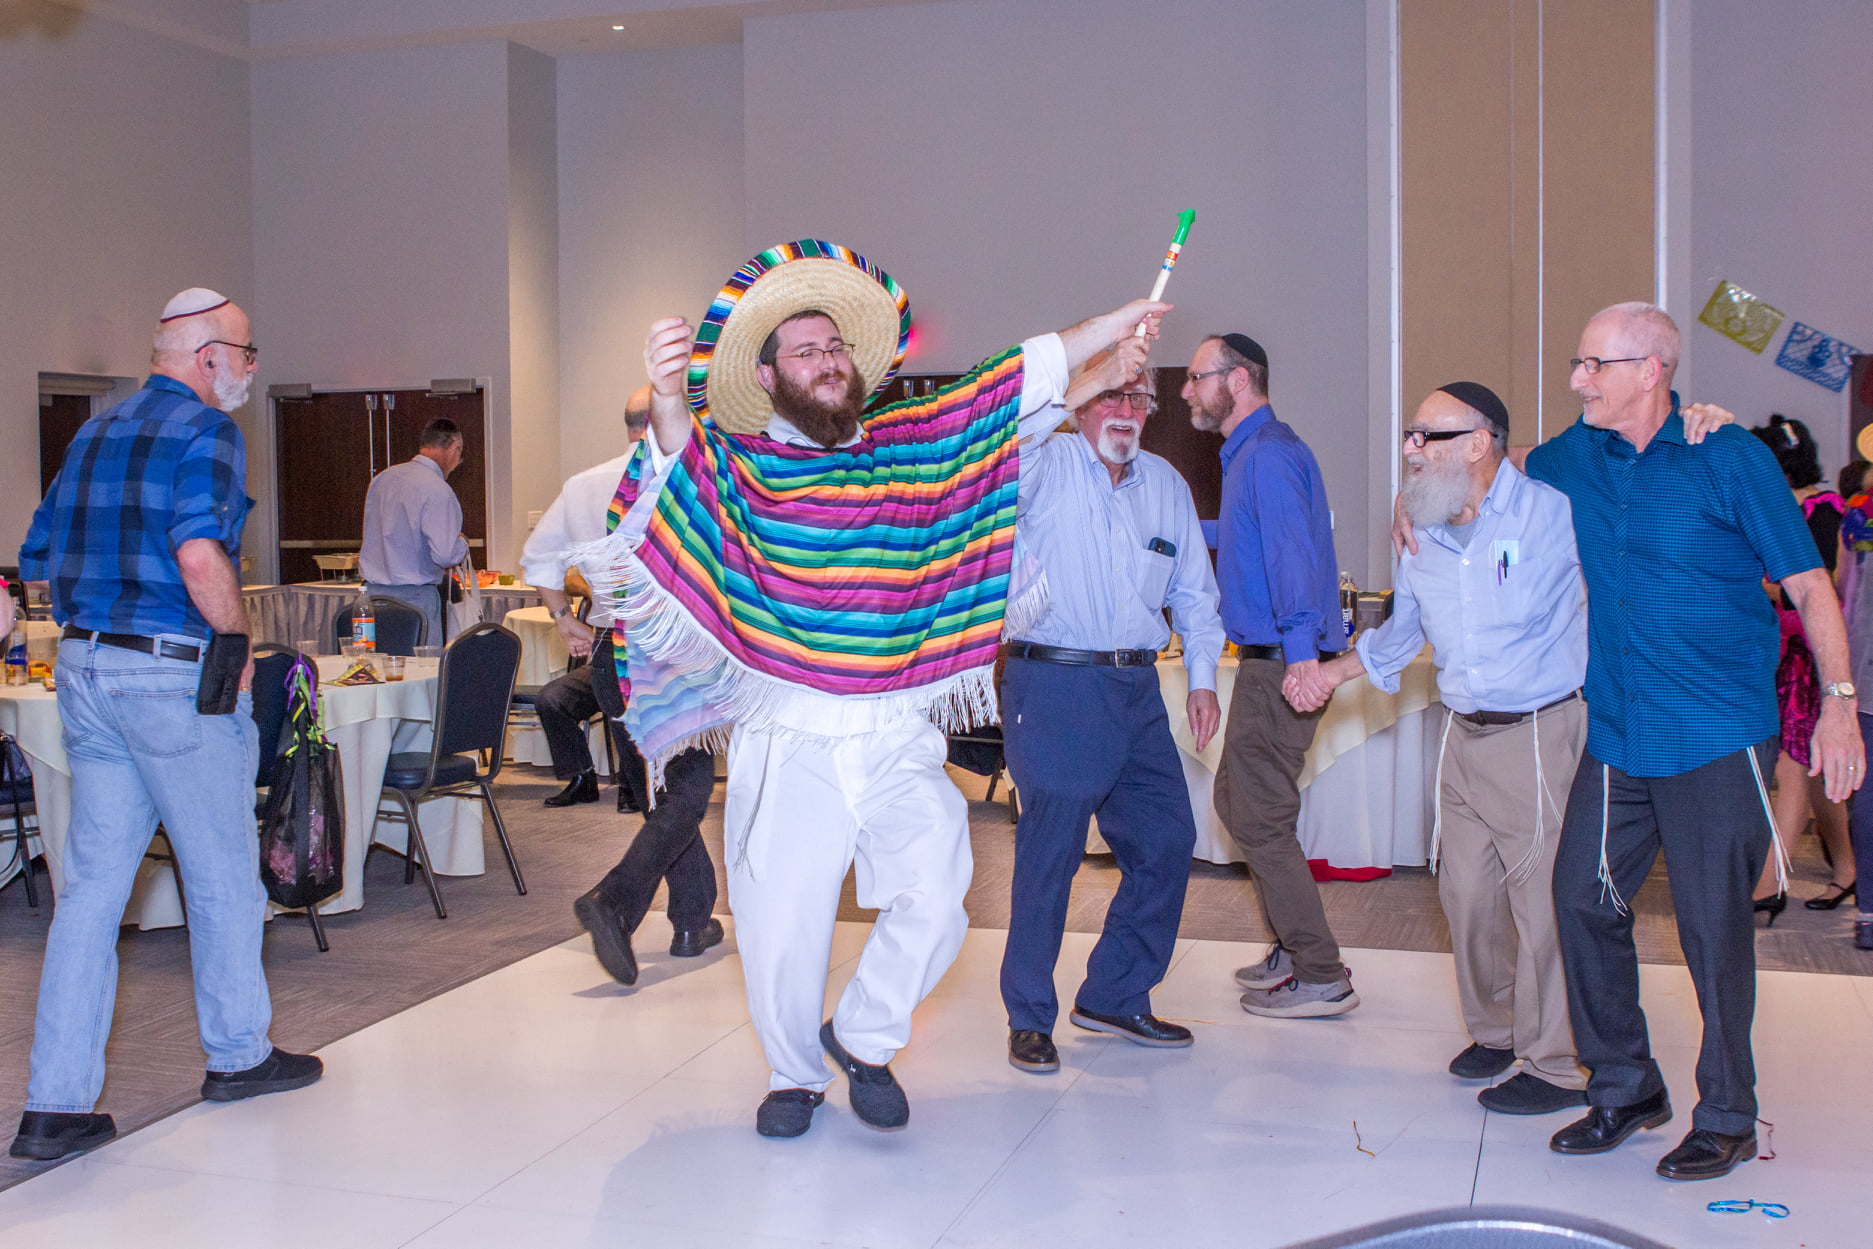 Get Your Fiddler on the Roof On: Chabad Jewish Center of Tamarac Hosts Purim at the Shtetl Bash 2